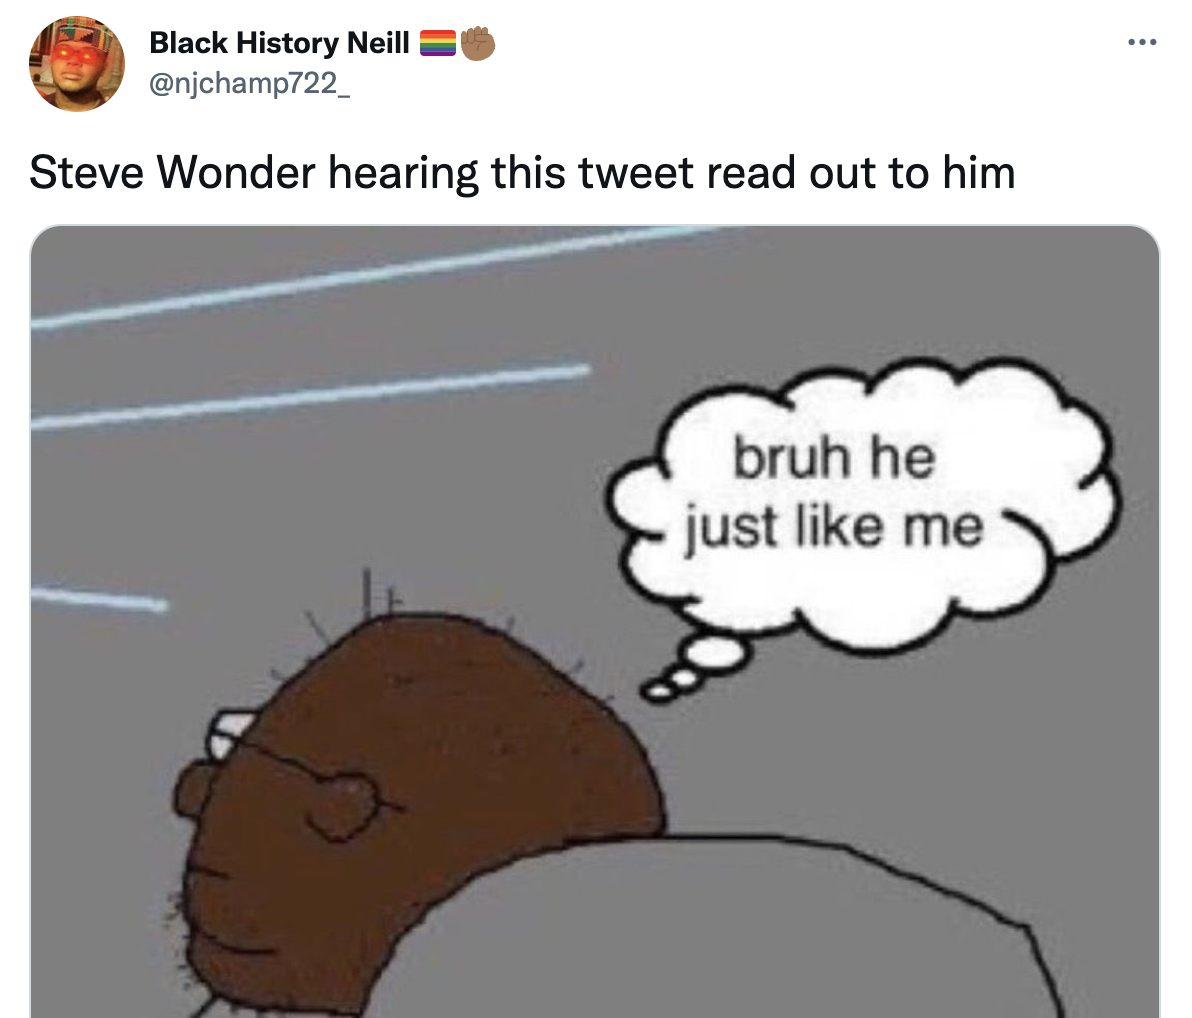 ray charles tweets - man this doin numbers - ... Black History Neill Steve Wonder hearing this tweet read out to him bruh he just me